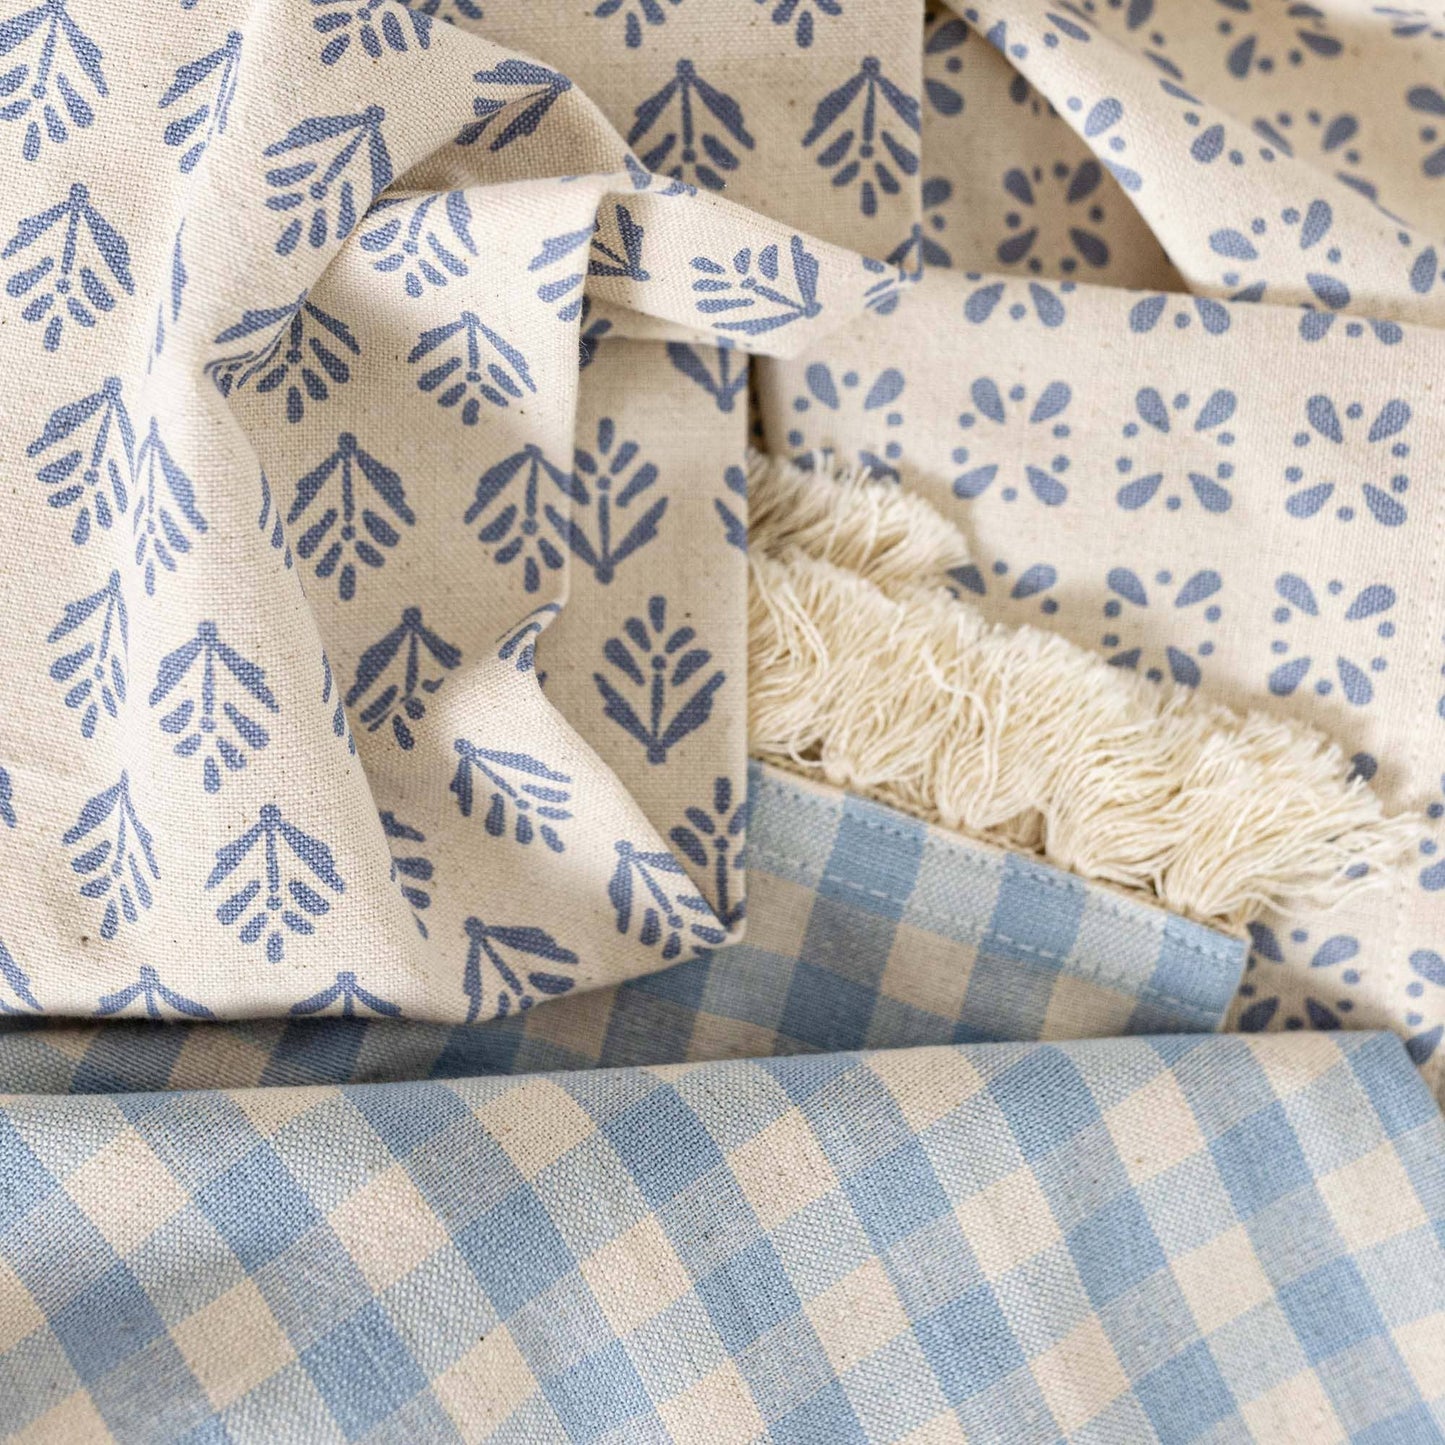 Foreside Home & Garden - Aggie Plaid Tea Towels Blue, Set Of 3